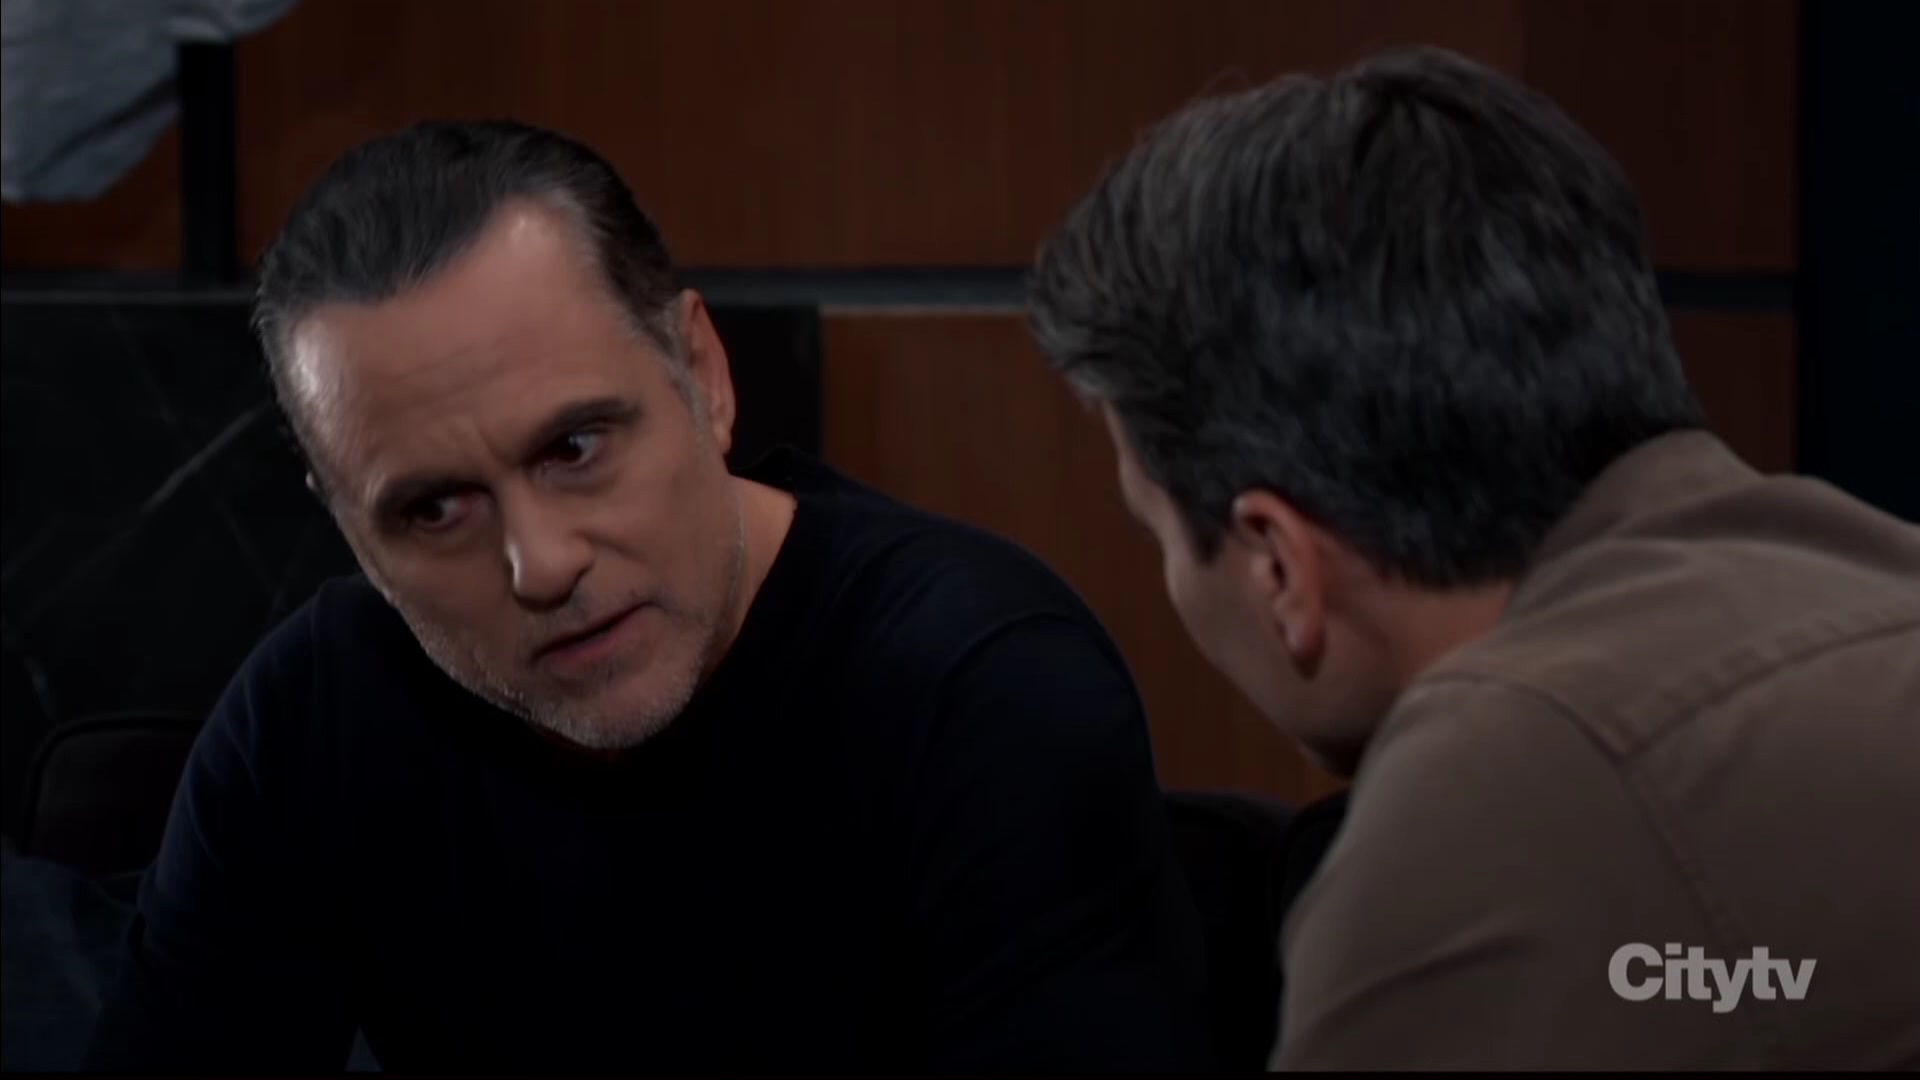 sonny talks to his cop son about the alleged illegal things he does